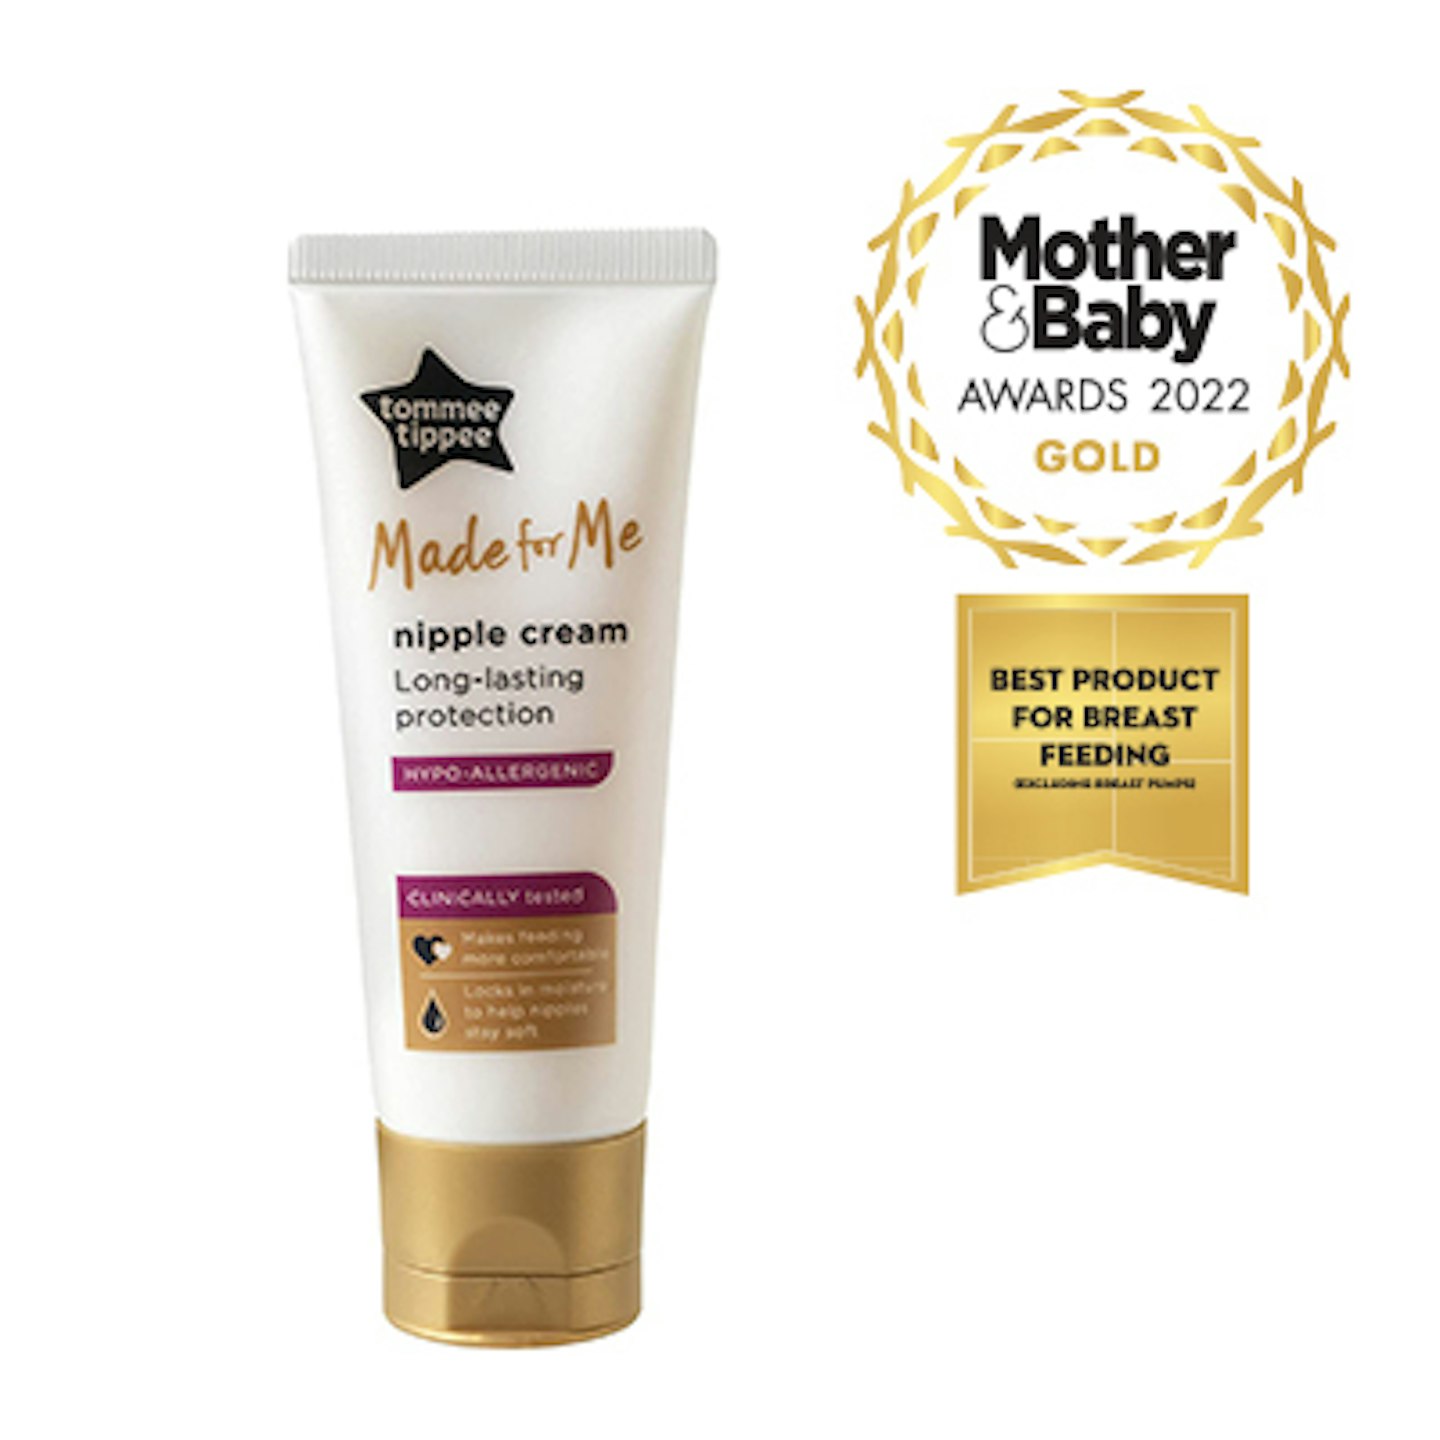 SQUARE-gold-breast-feeding-product